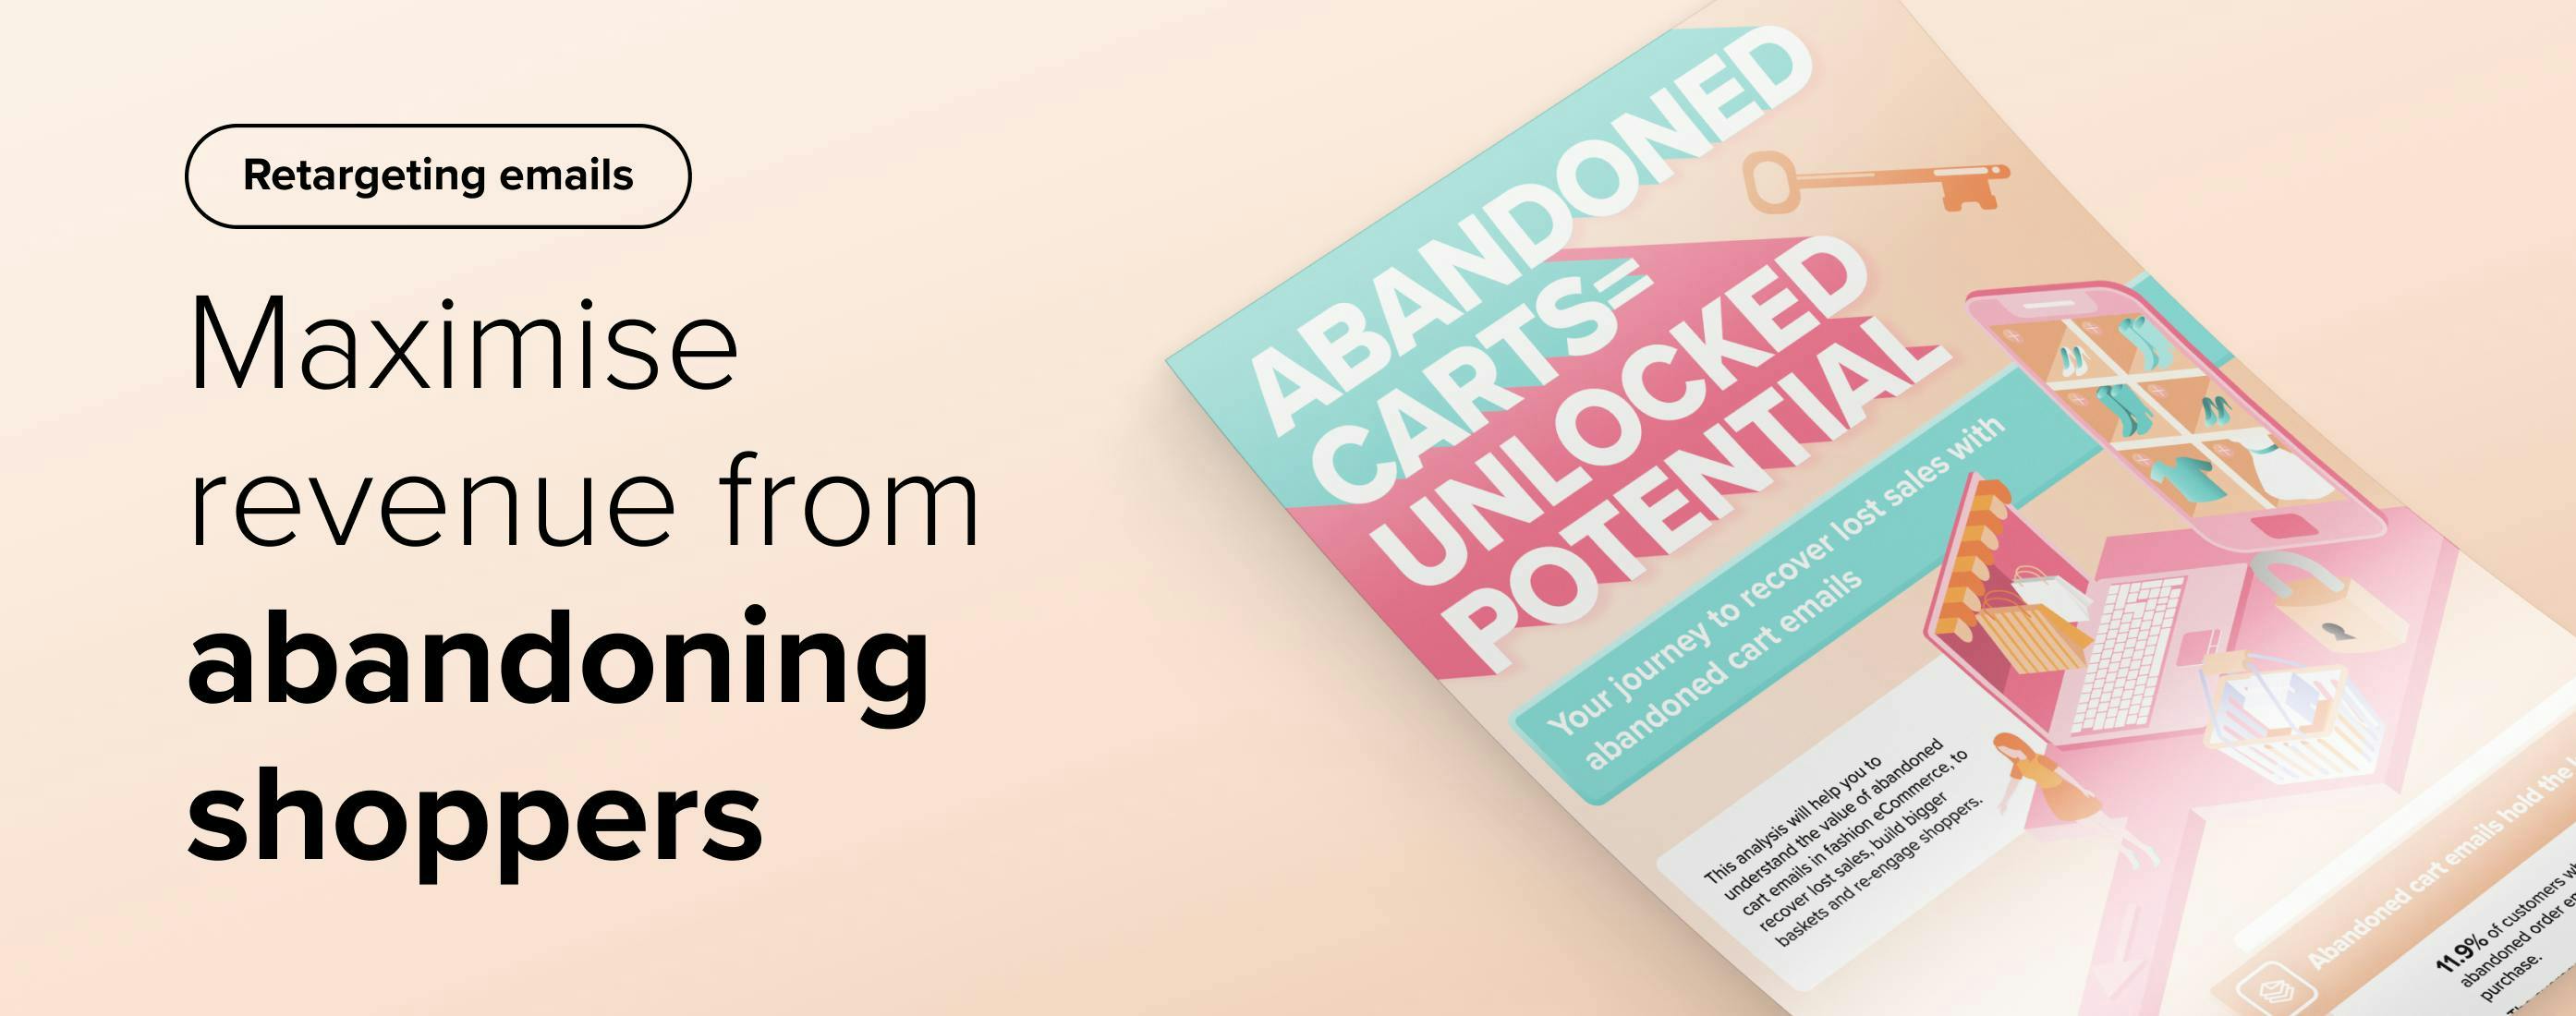 [INFOGRAPHIC] Cart Abandonment Emails: Why Your Fashion Business Needs Them